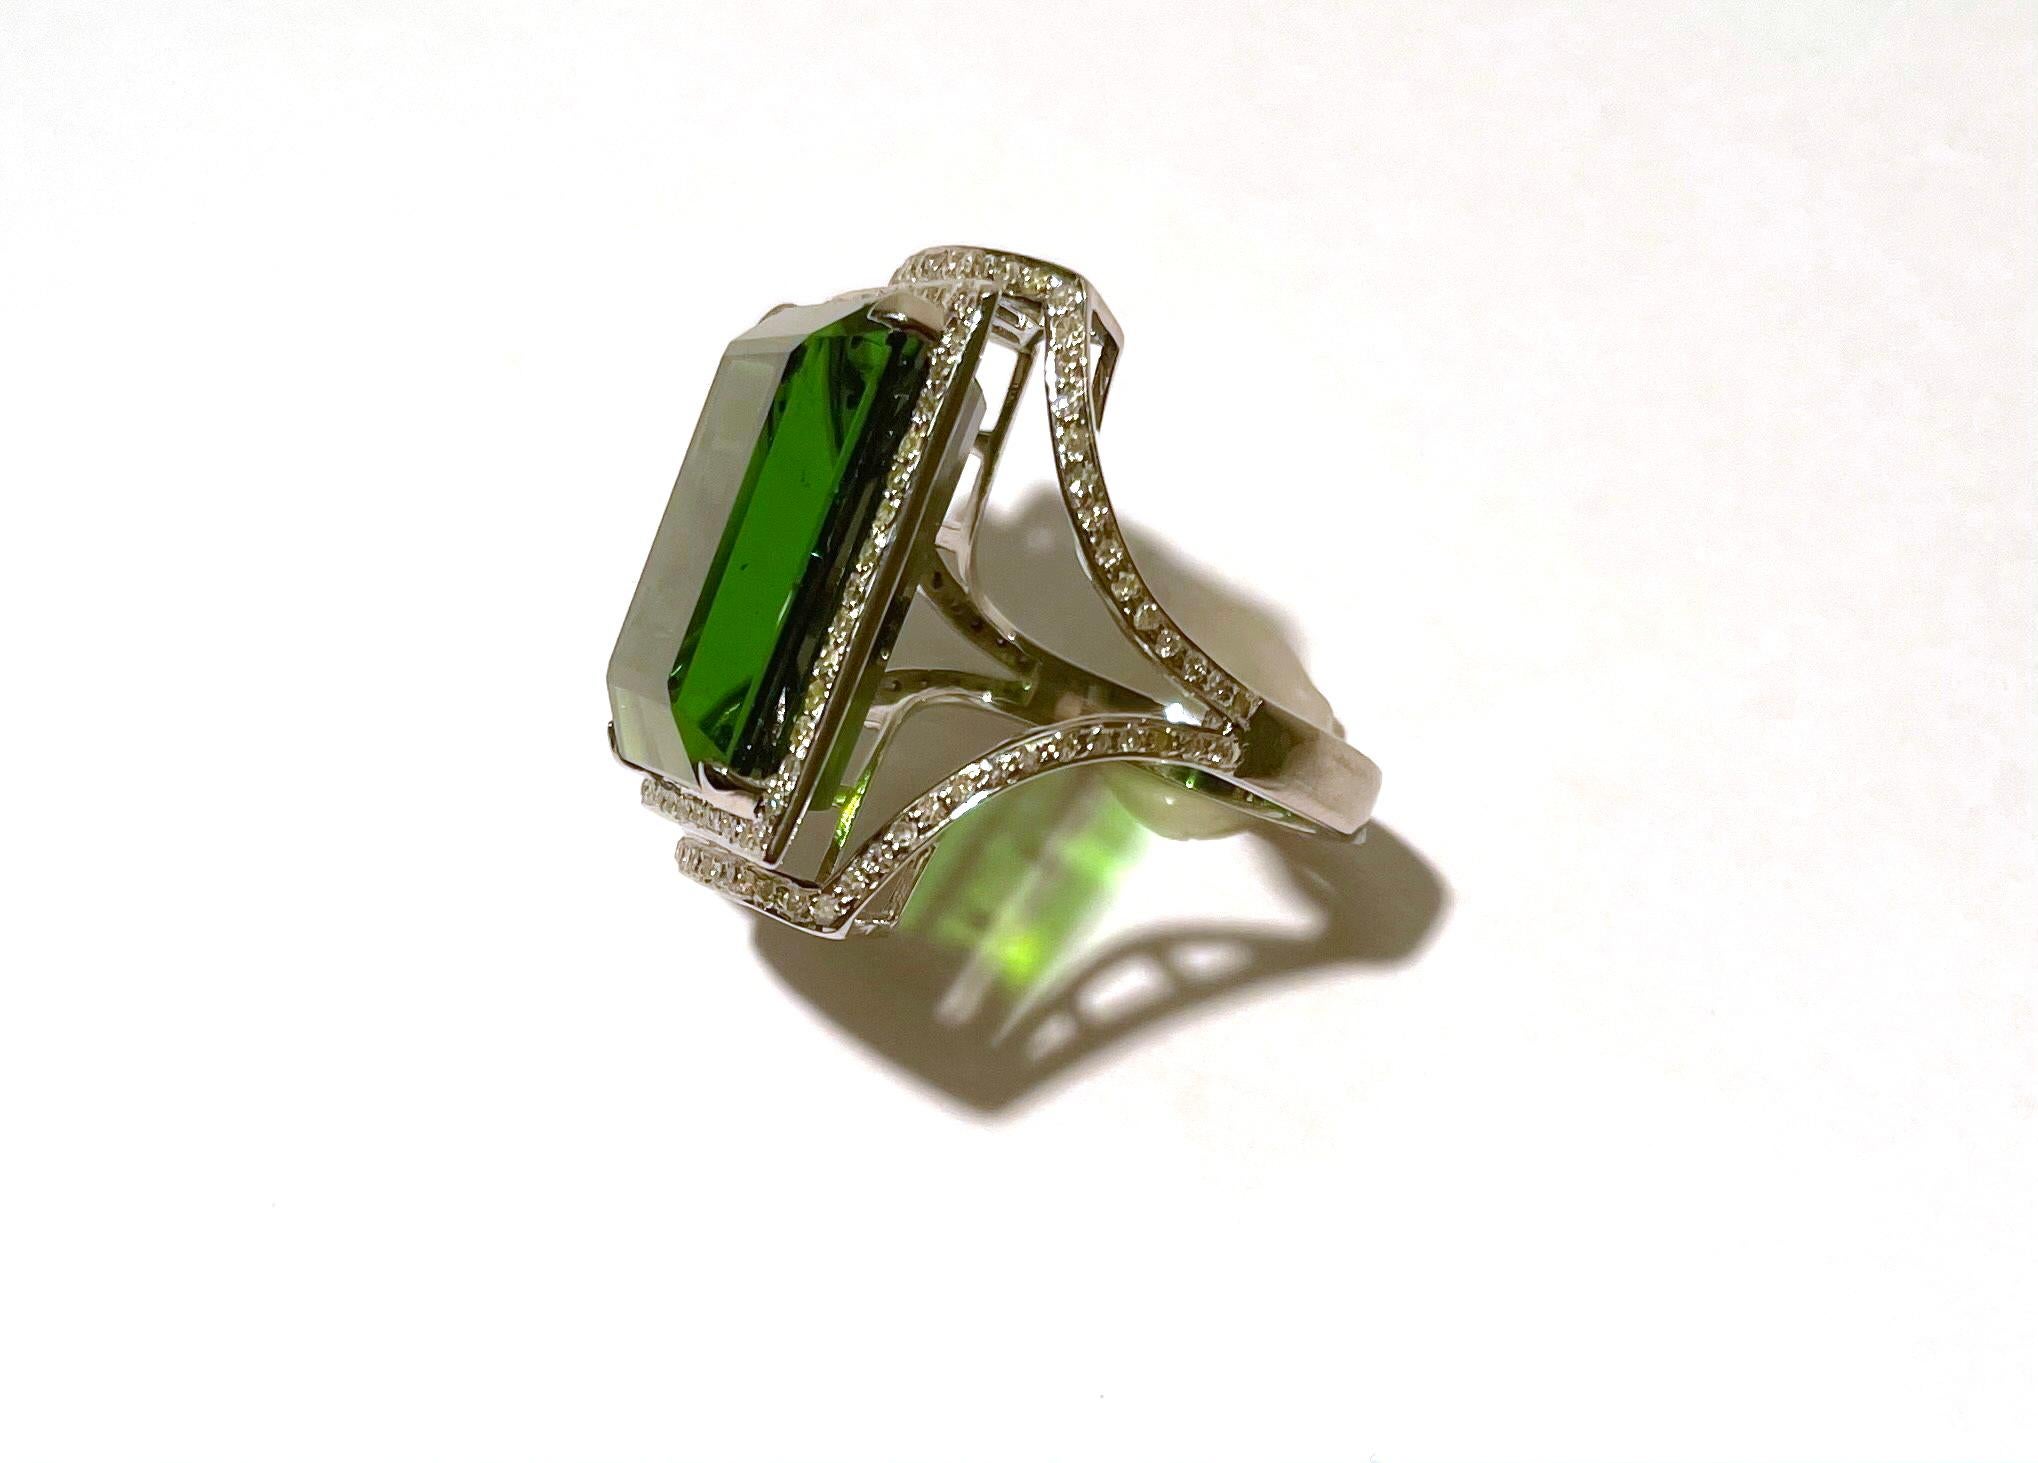 Green Tourmaline 25.2cts Emerald Cut with Pave Diamonds Ring In New Condition For Sale In Laguna Beach, CA